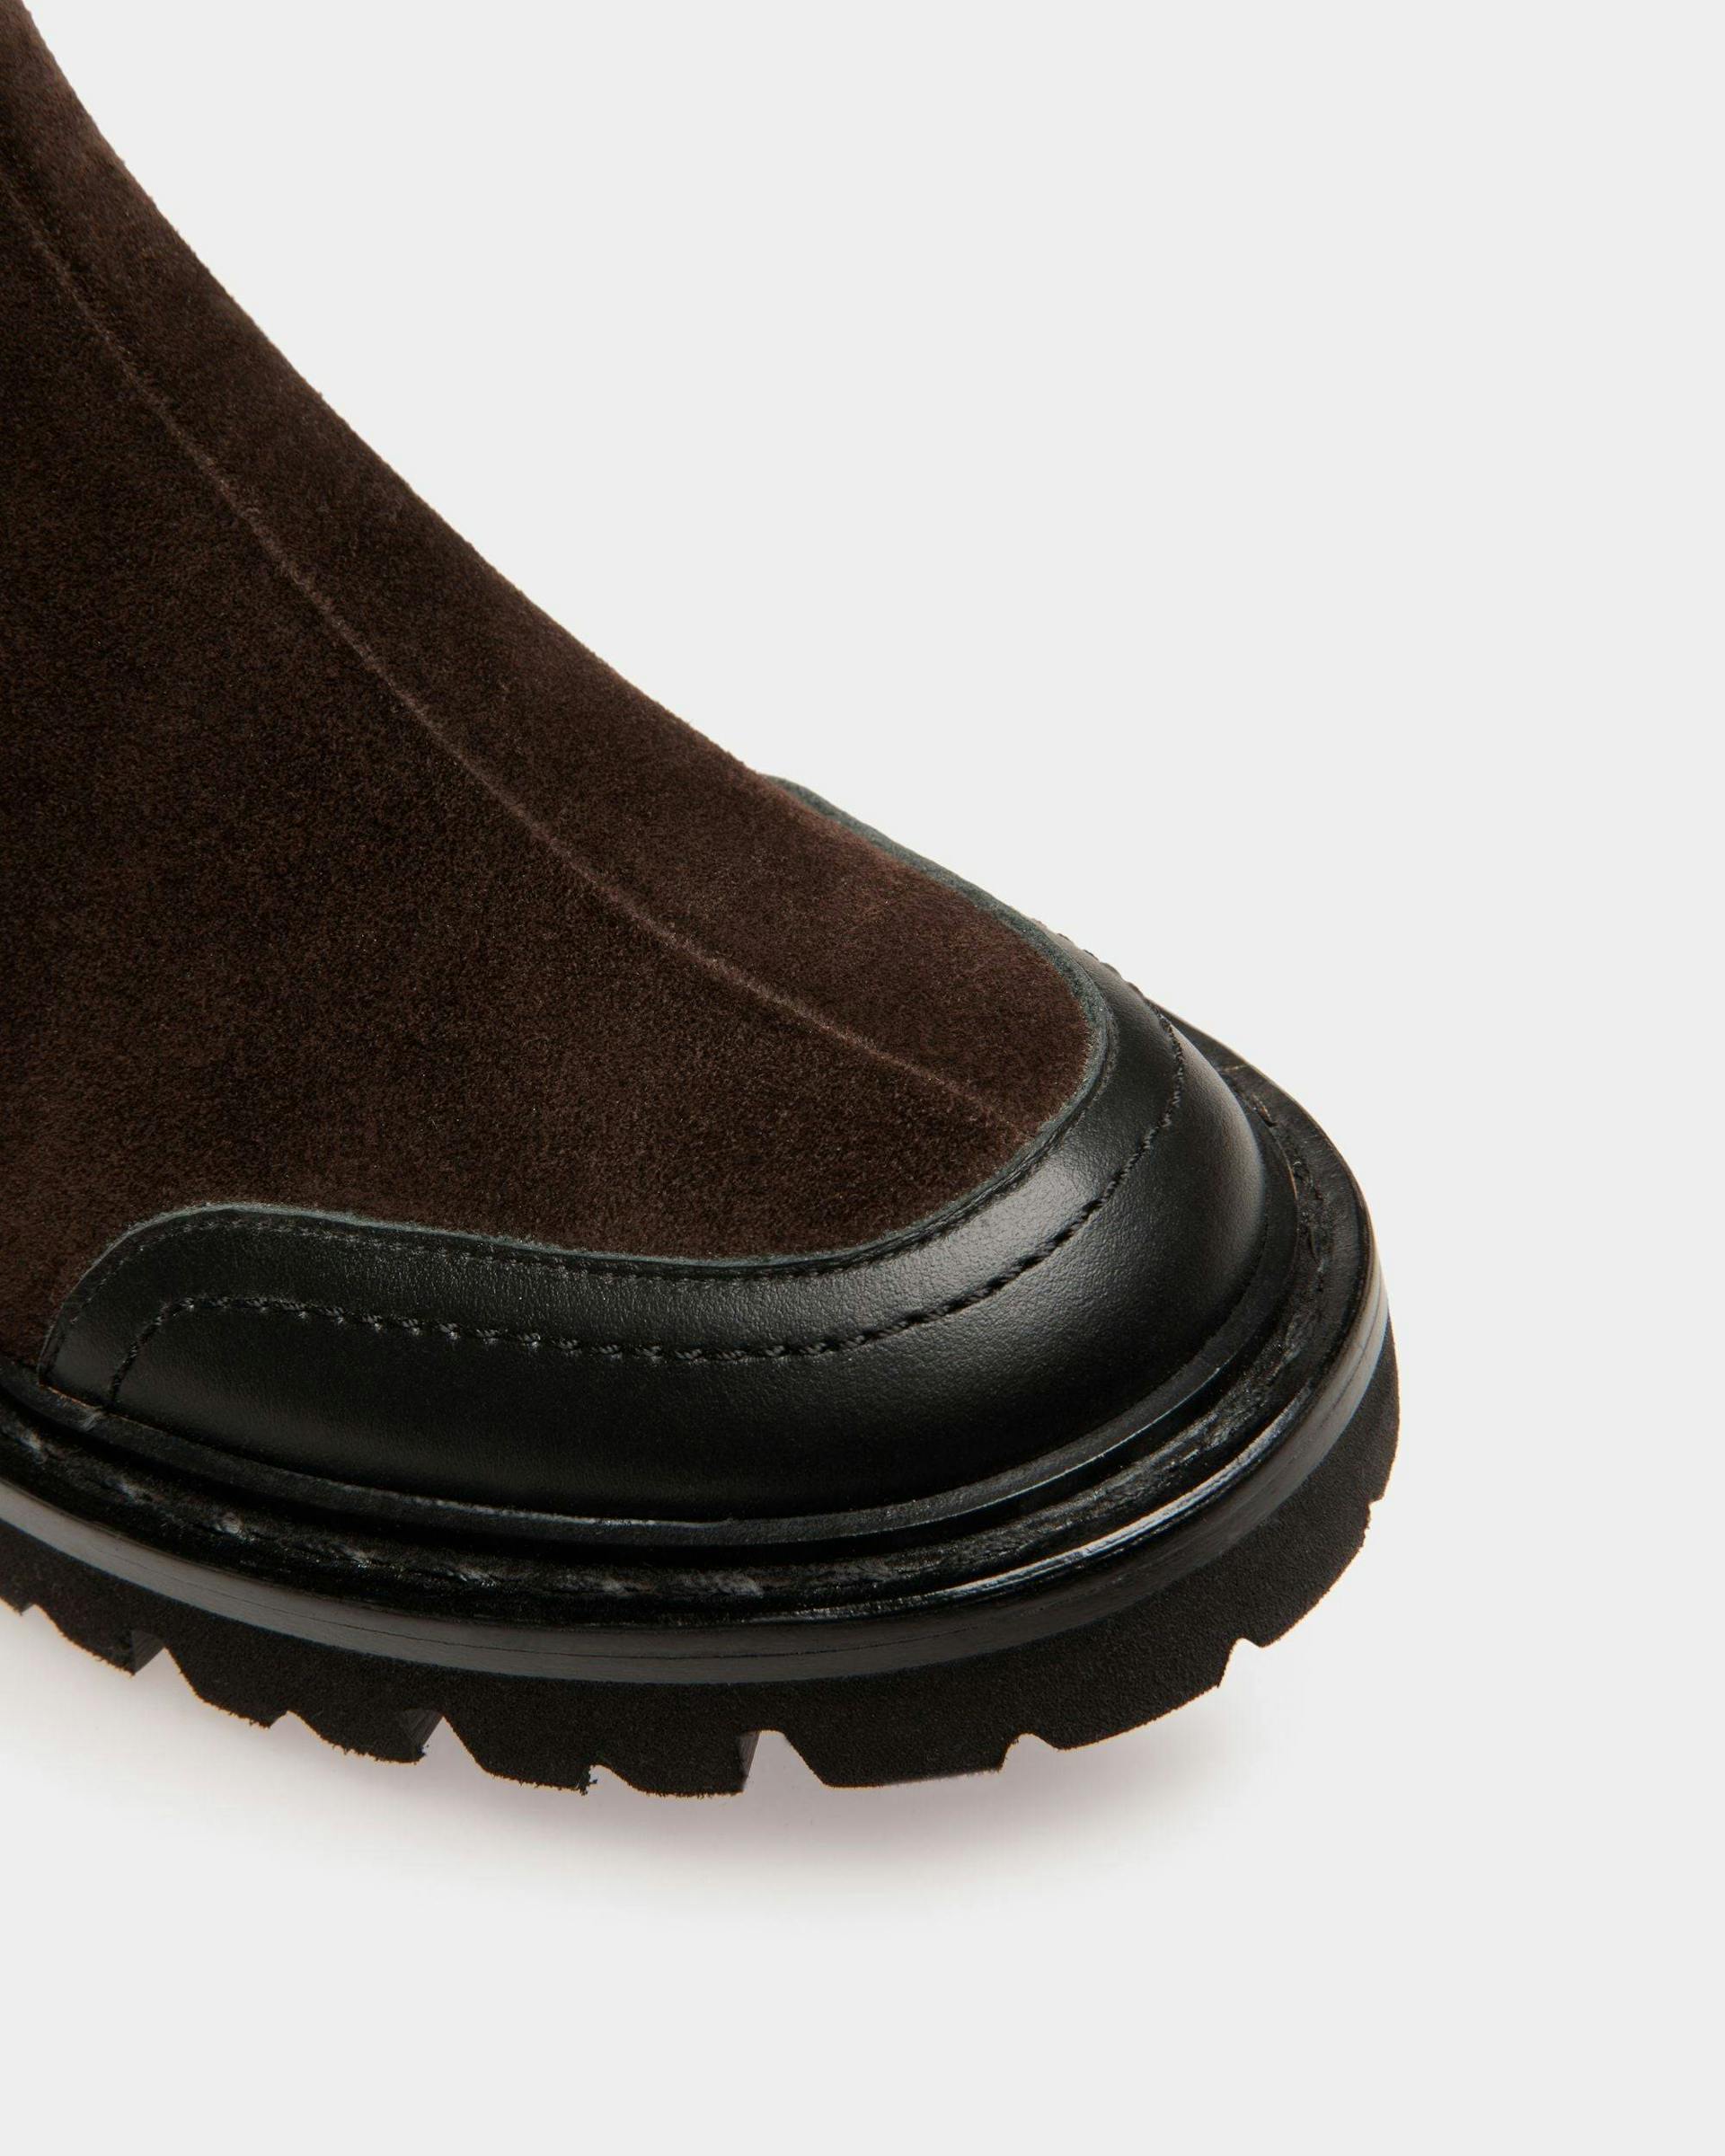 Women's Enga Boots In Brown Leather | Bally | Still Life Detail